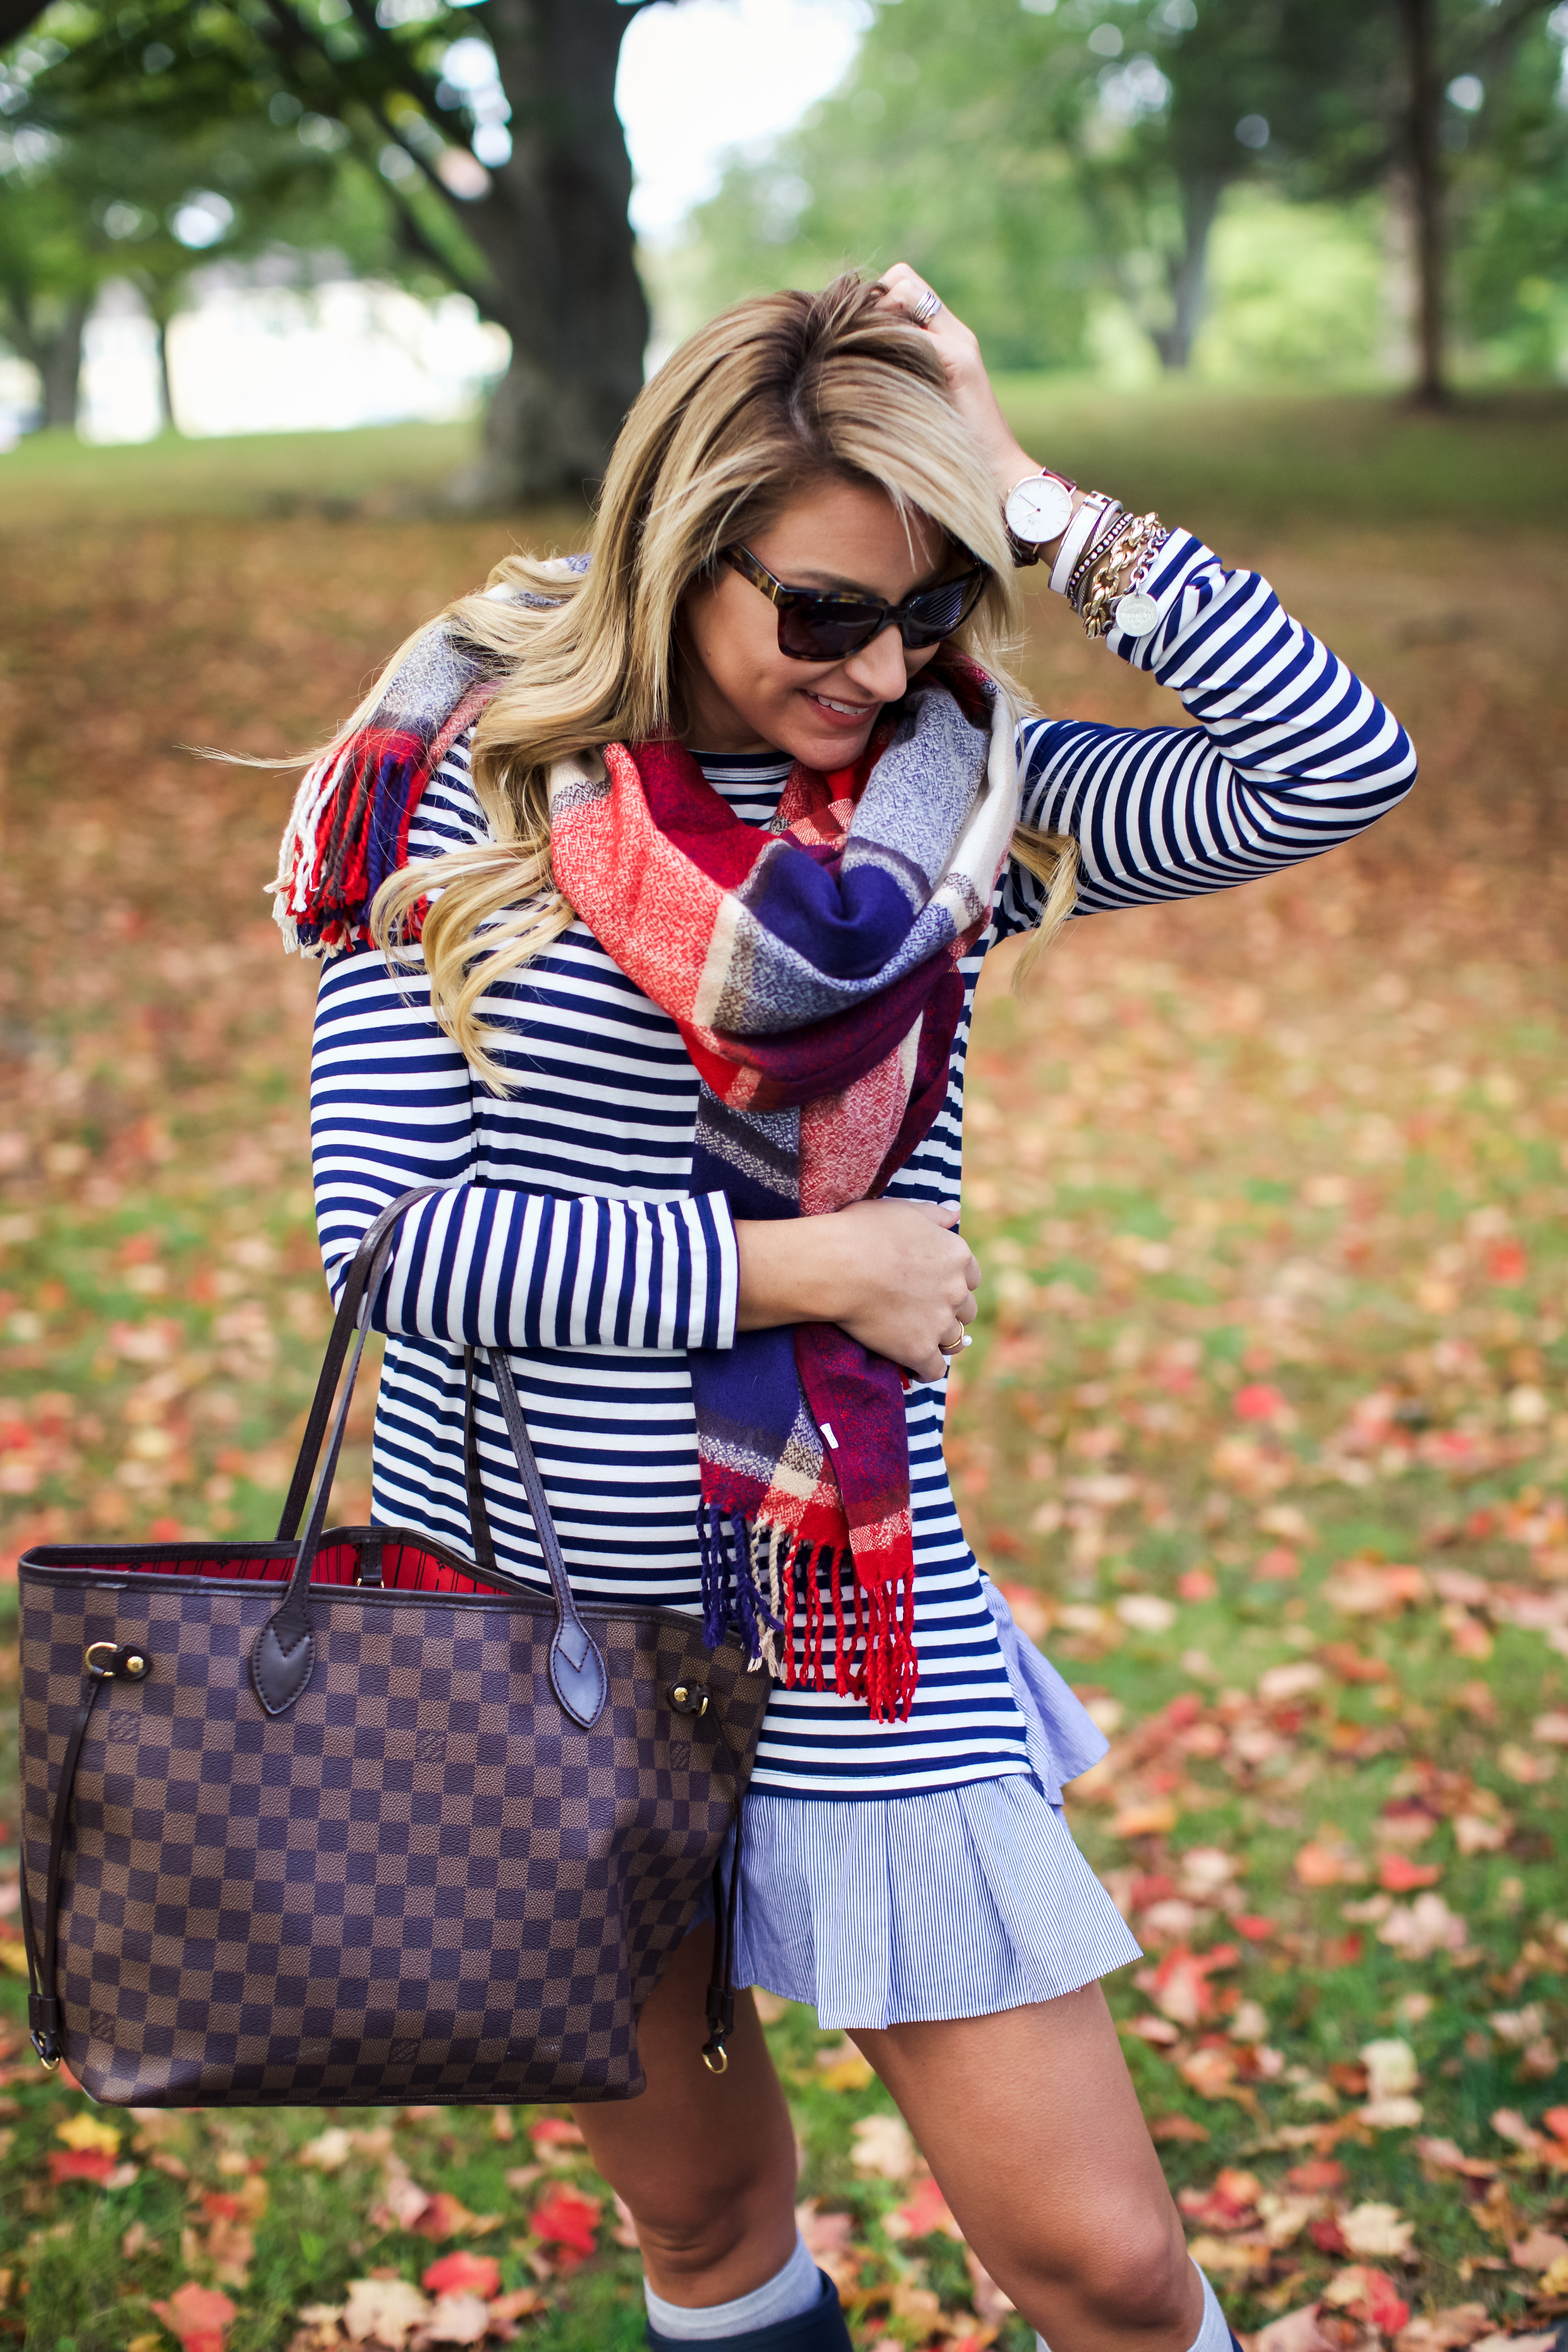 LV red scarf  Outfit combinations, Fashion, How to wear